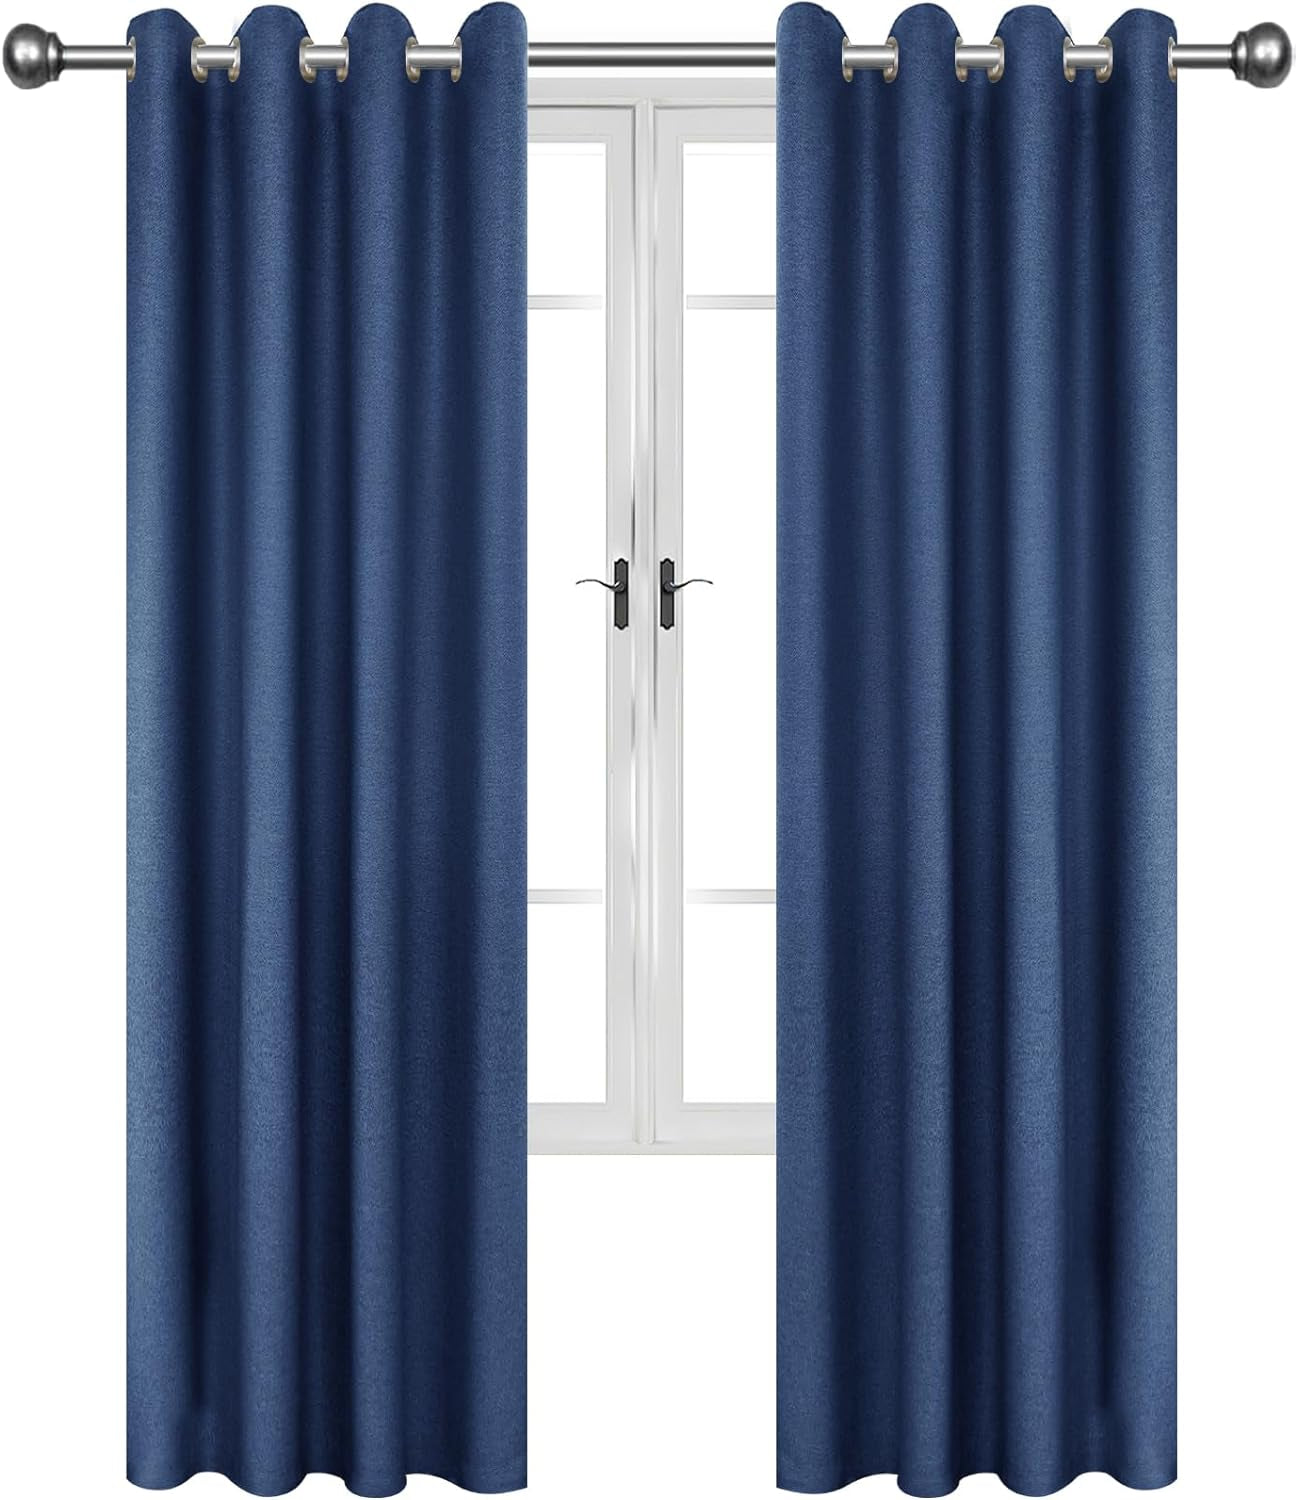 JIVINER Blackout Curtains 84 Inches Long Soundproof Thermal Insulated Curtains/Drapes/Panels for Kid'S Room (Baby Pink, W42 X L84,2 Panels)  JWN E-Commerce Linen Dark Blue W42 X L84 ,2 Panels 